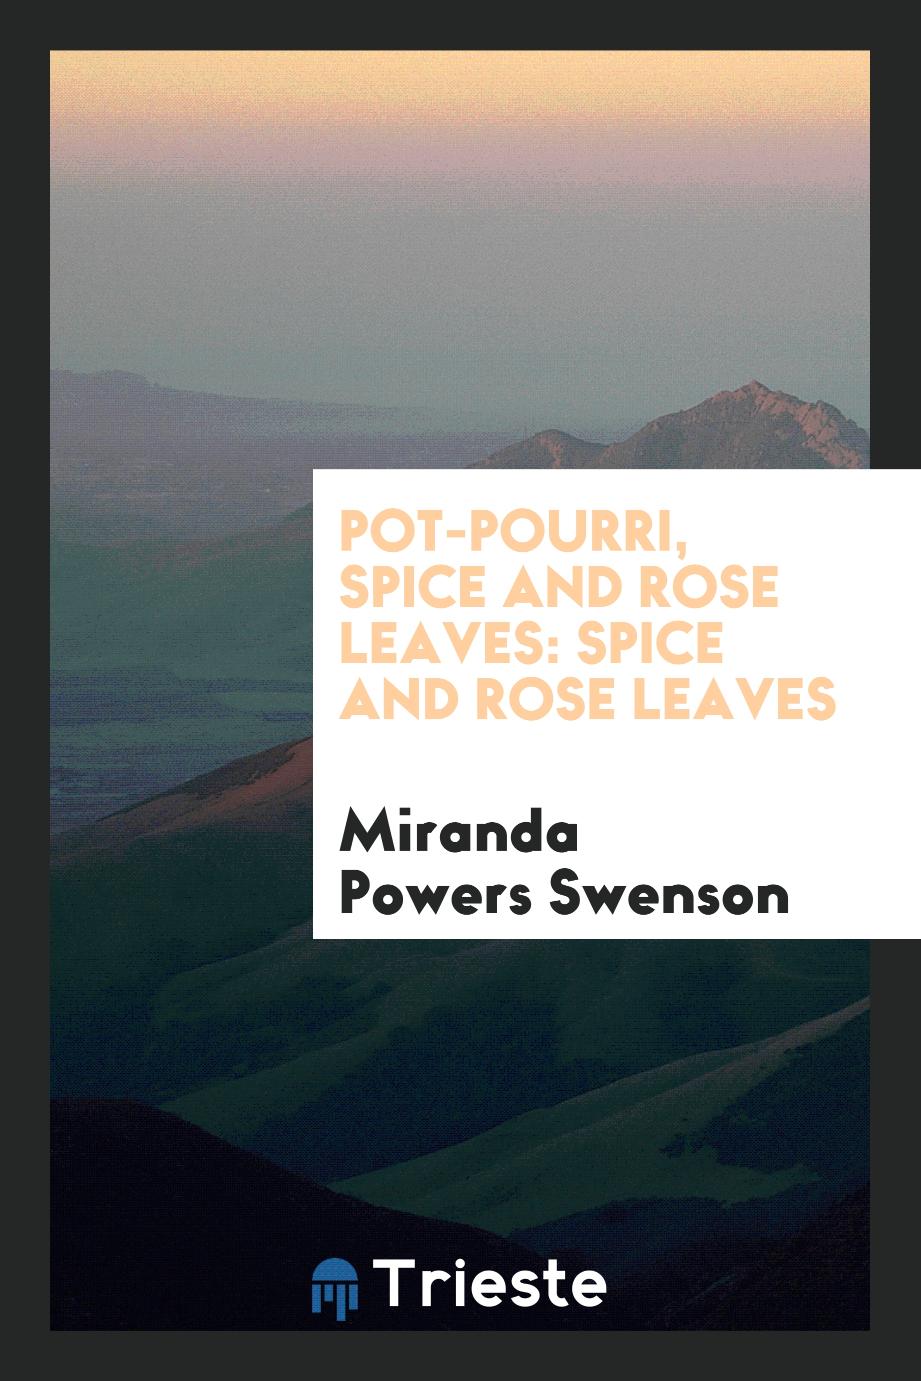 Pot-pourri, Spice and Rose Leaves: Spice and Rose Leaves